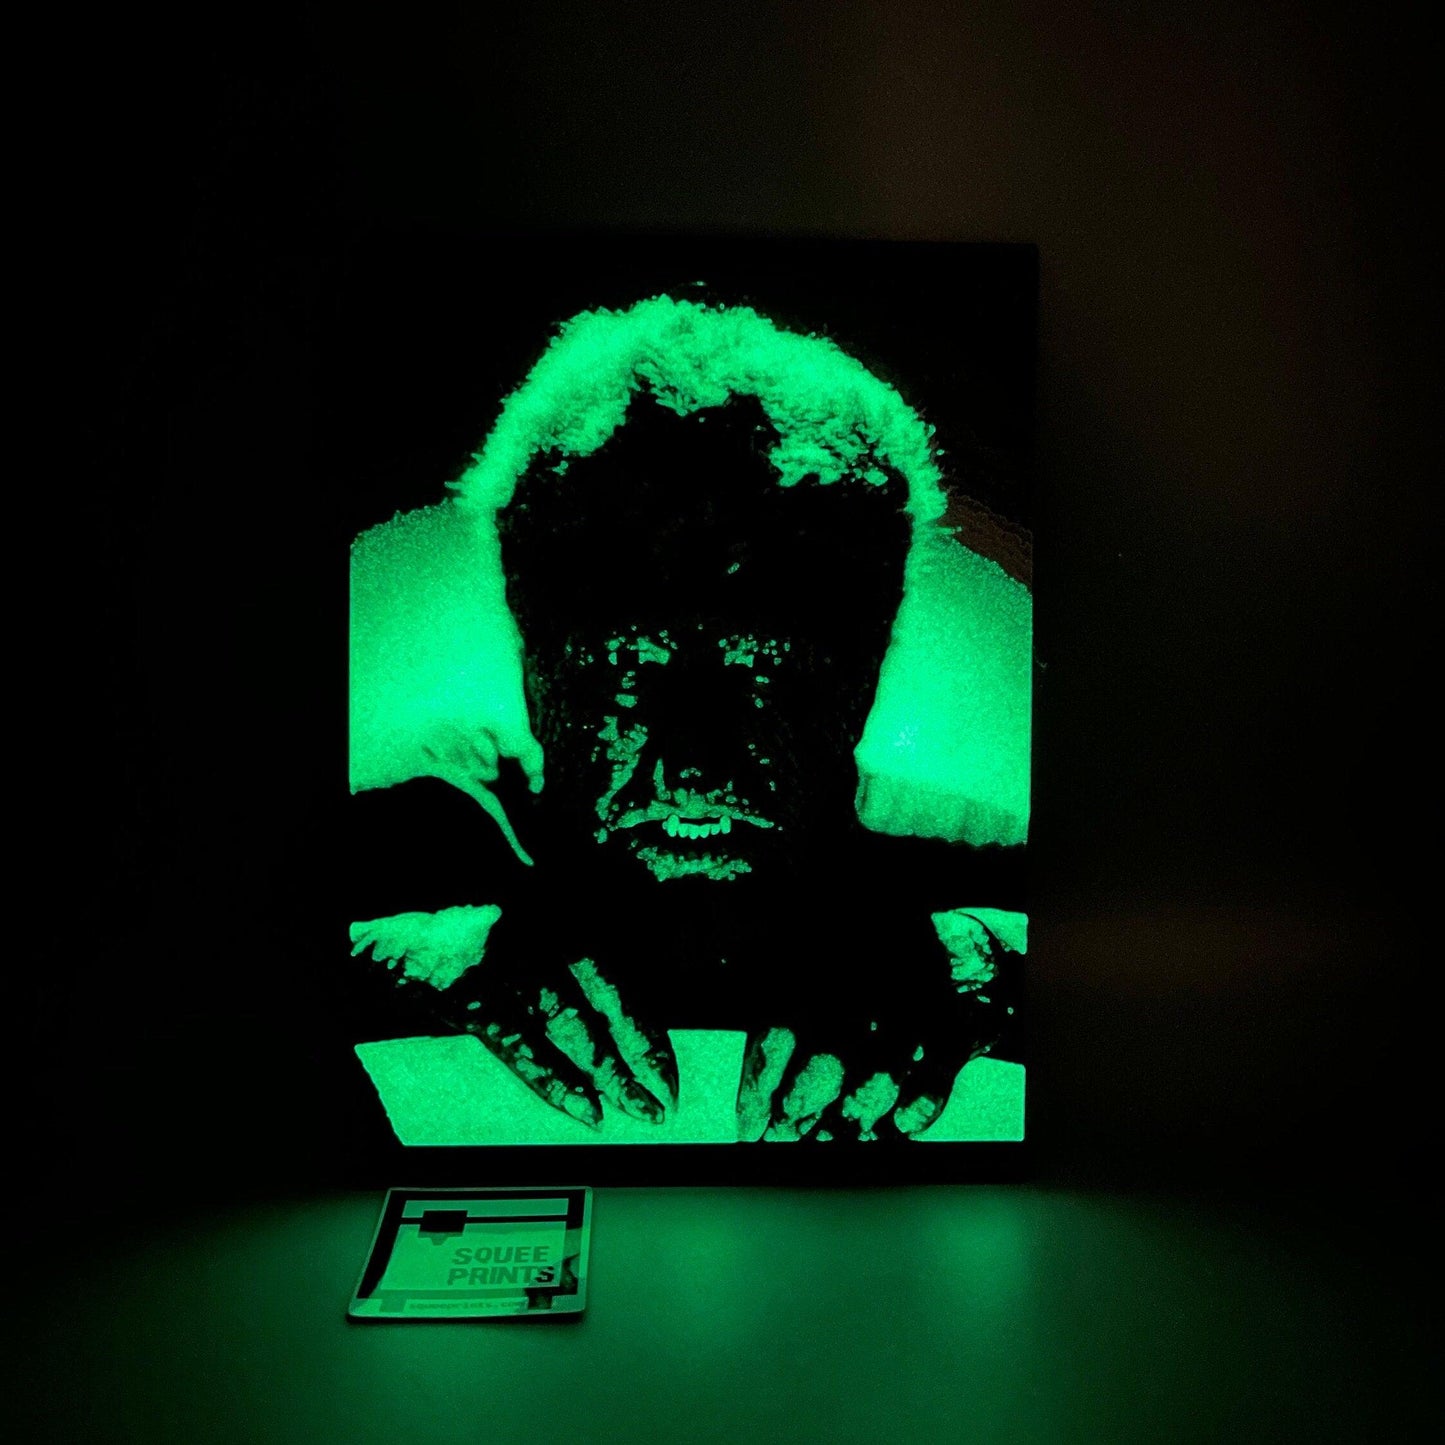 The Wolfman | 3D Painting | Glow in the Dark - Squee Prints